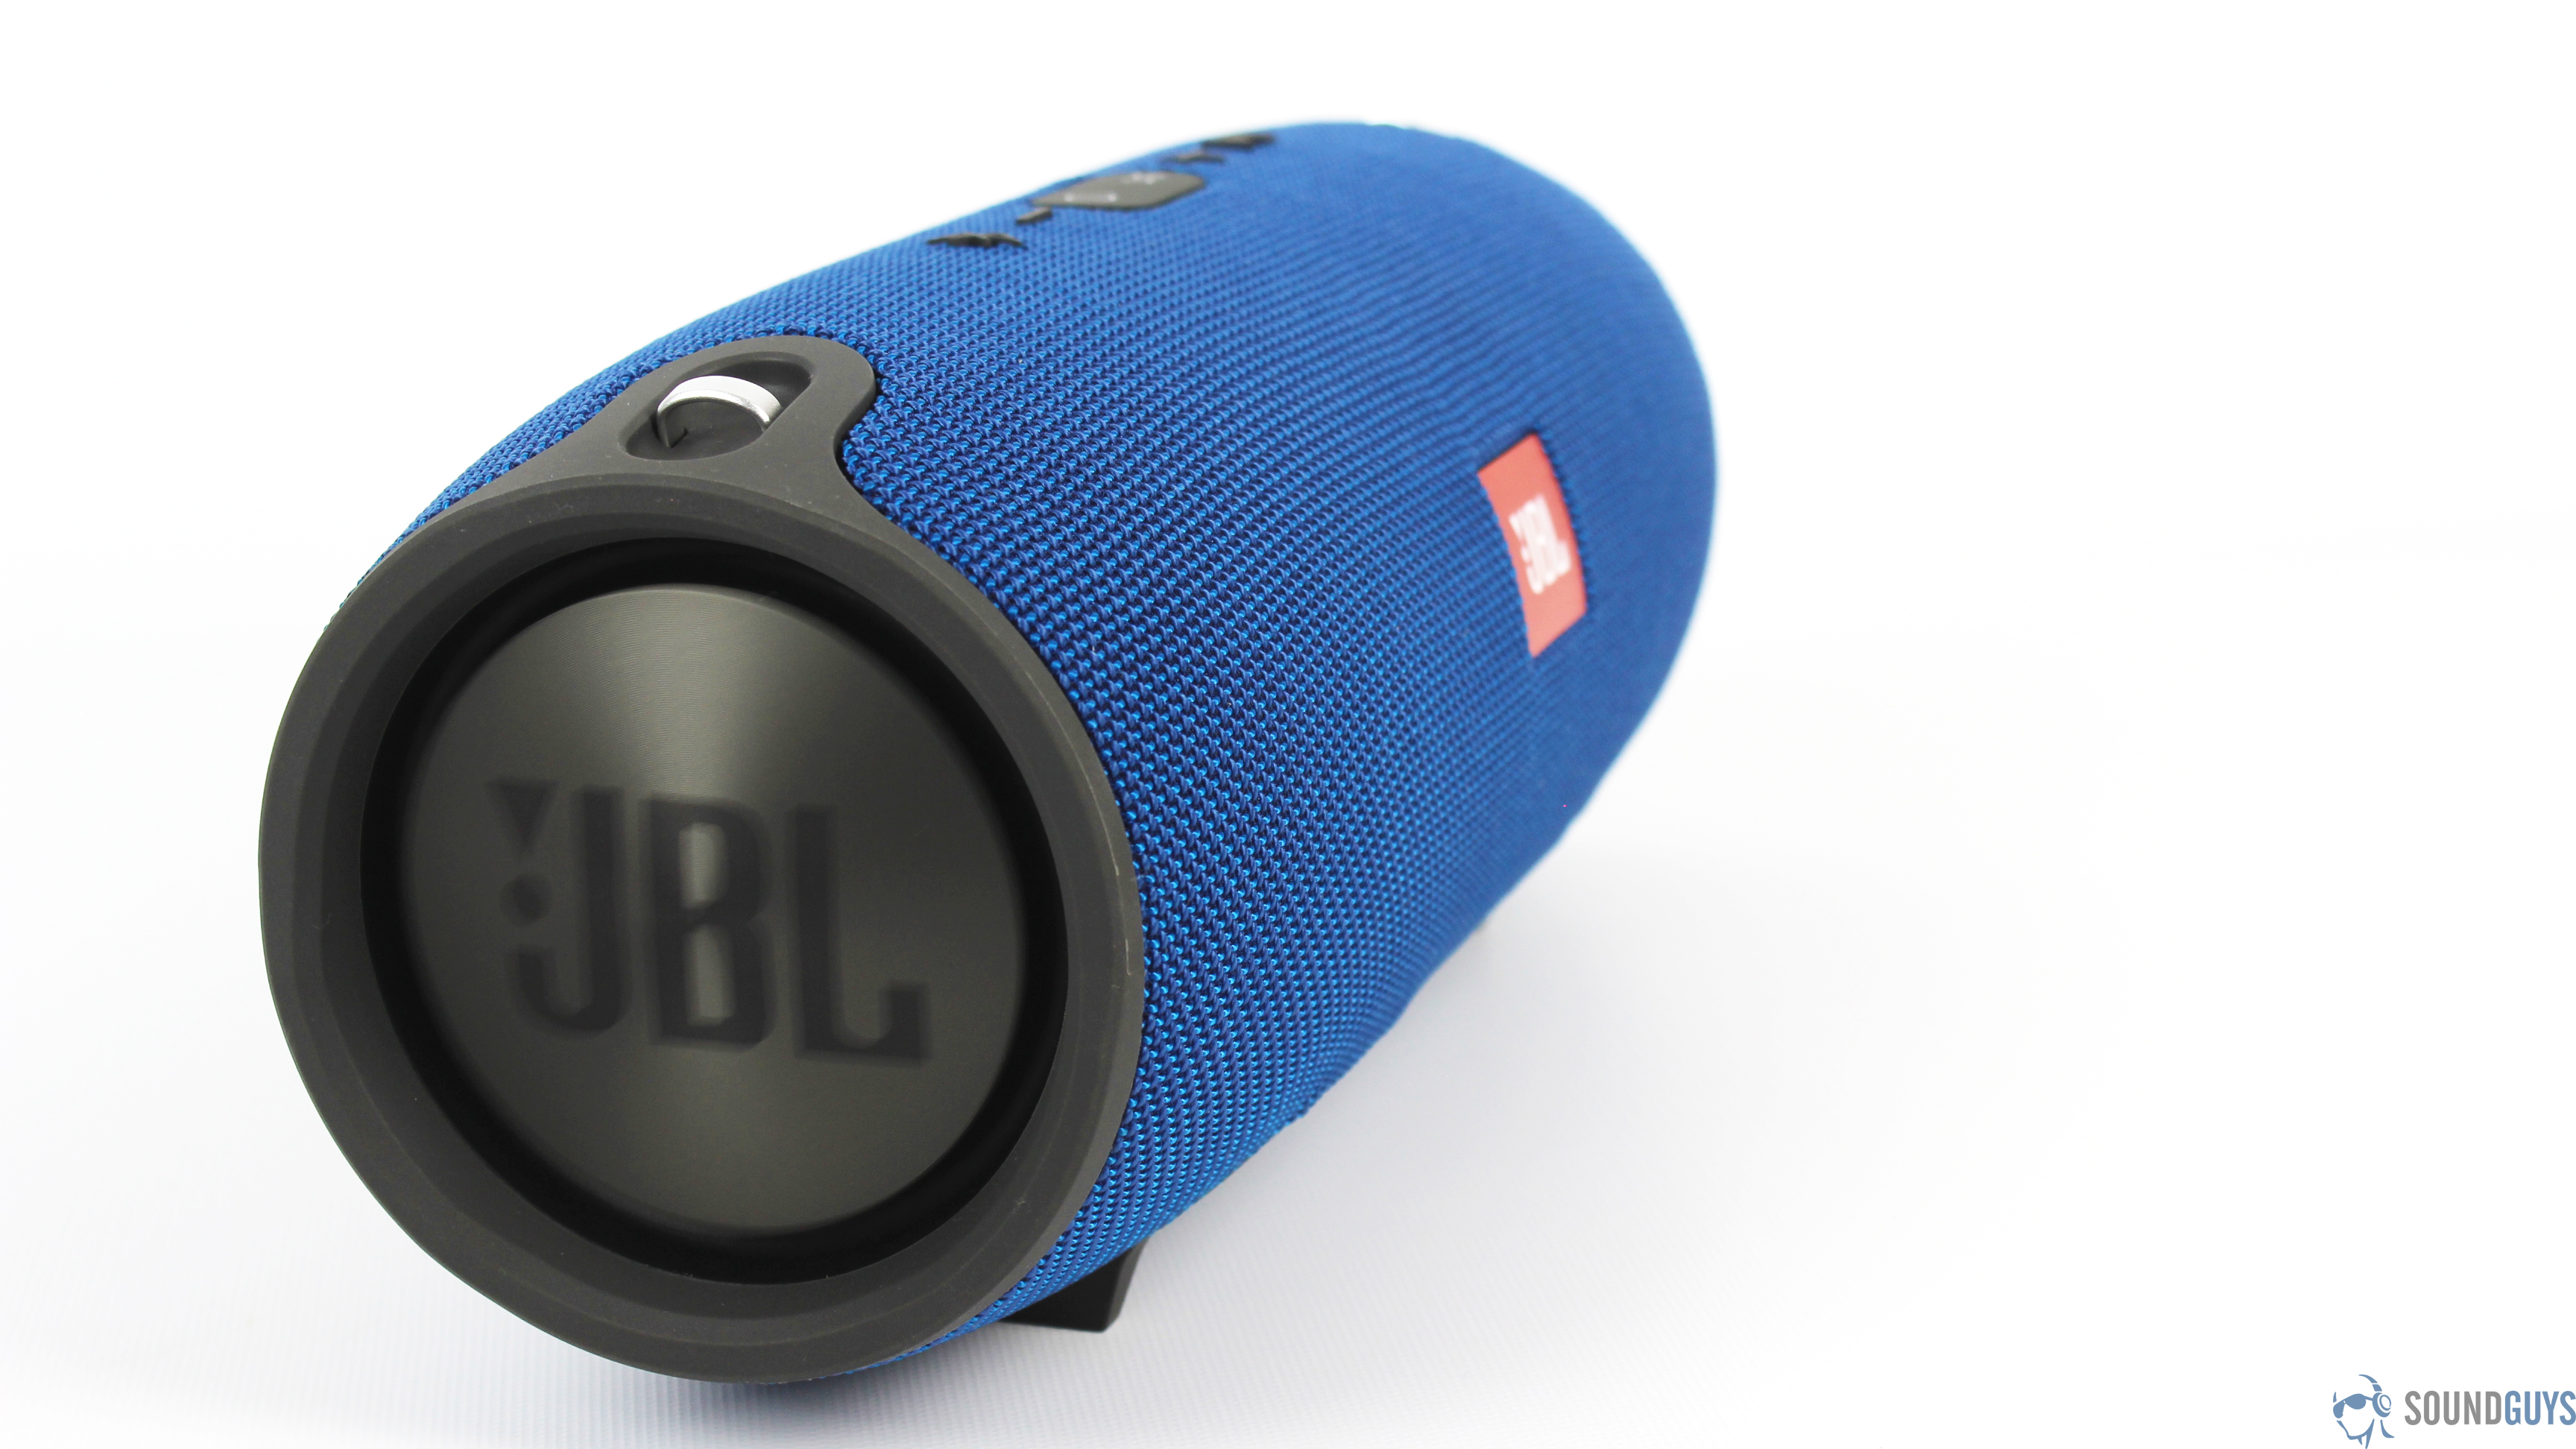 JBL Xtreme review: An old speaker keeps up with the times